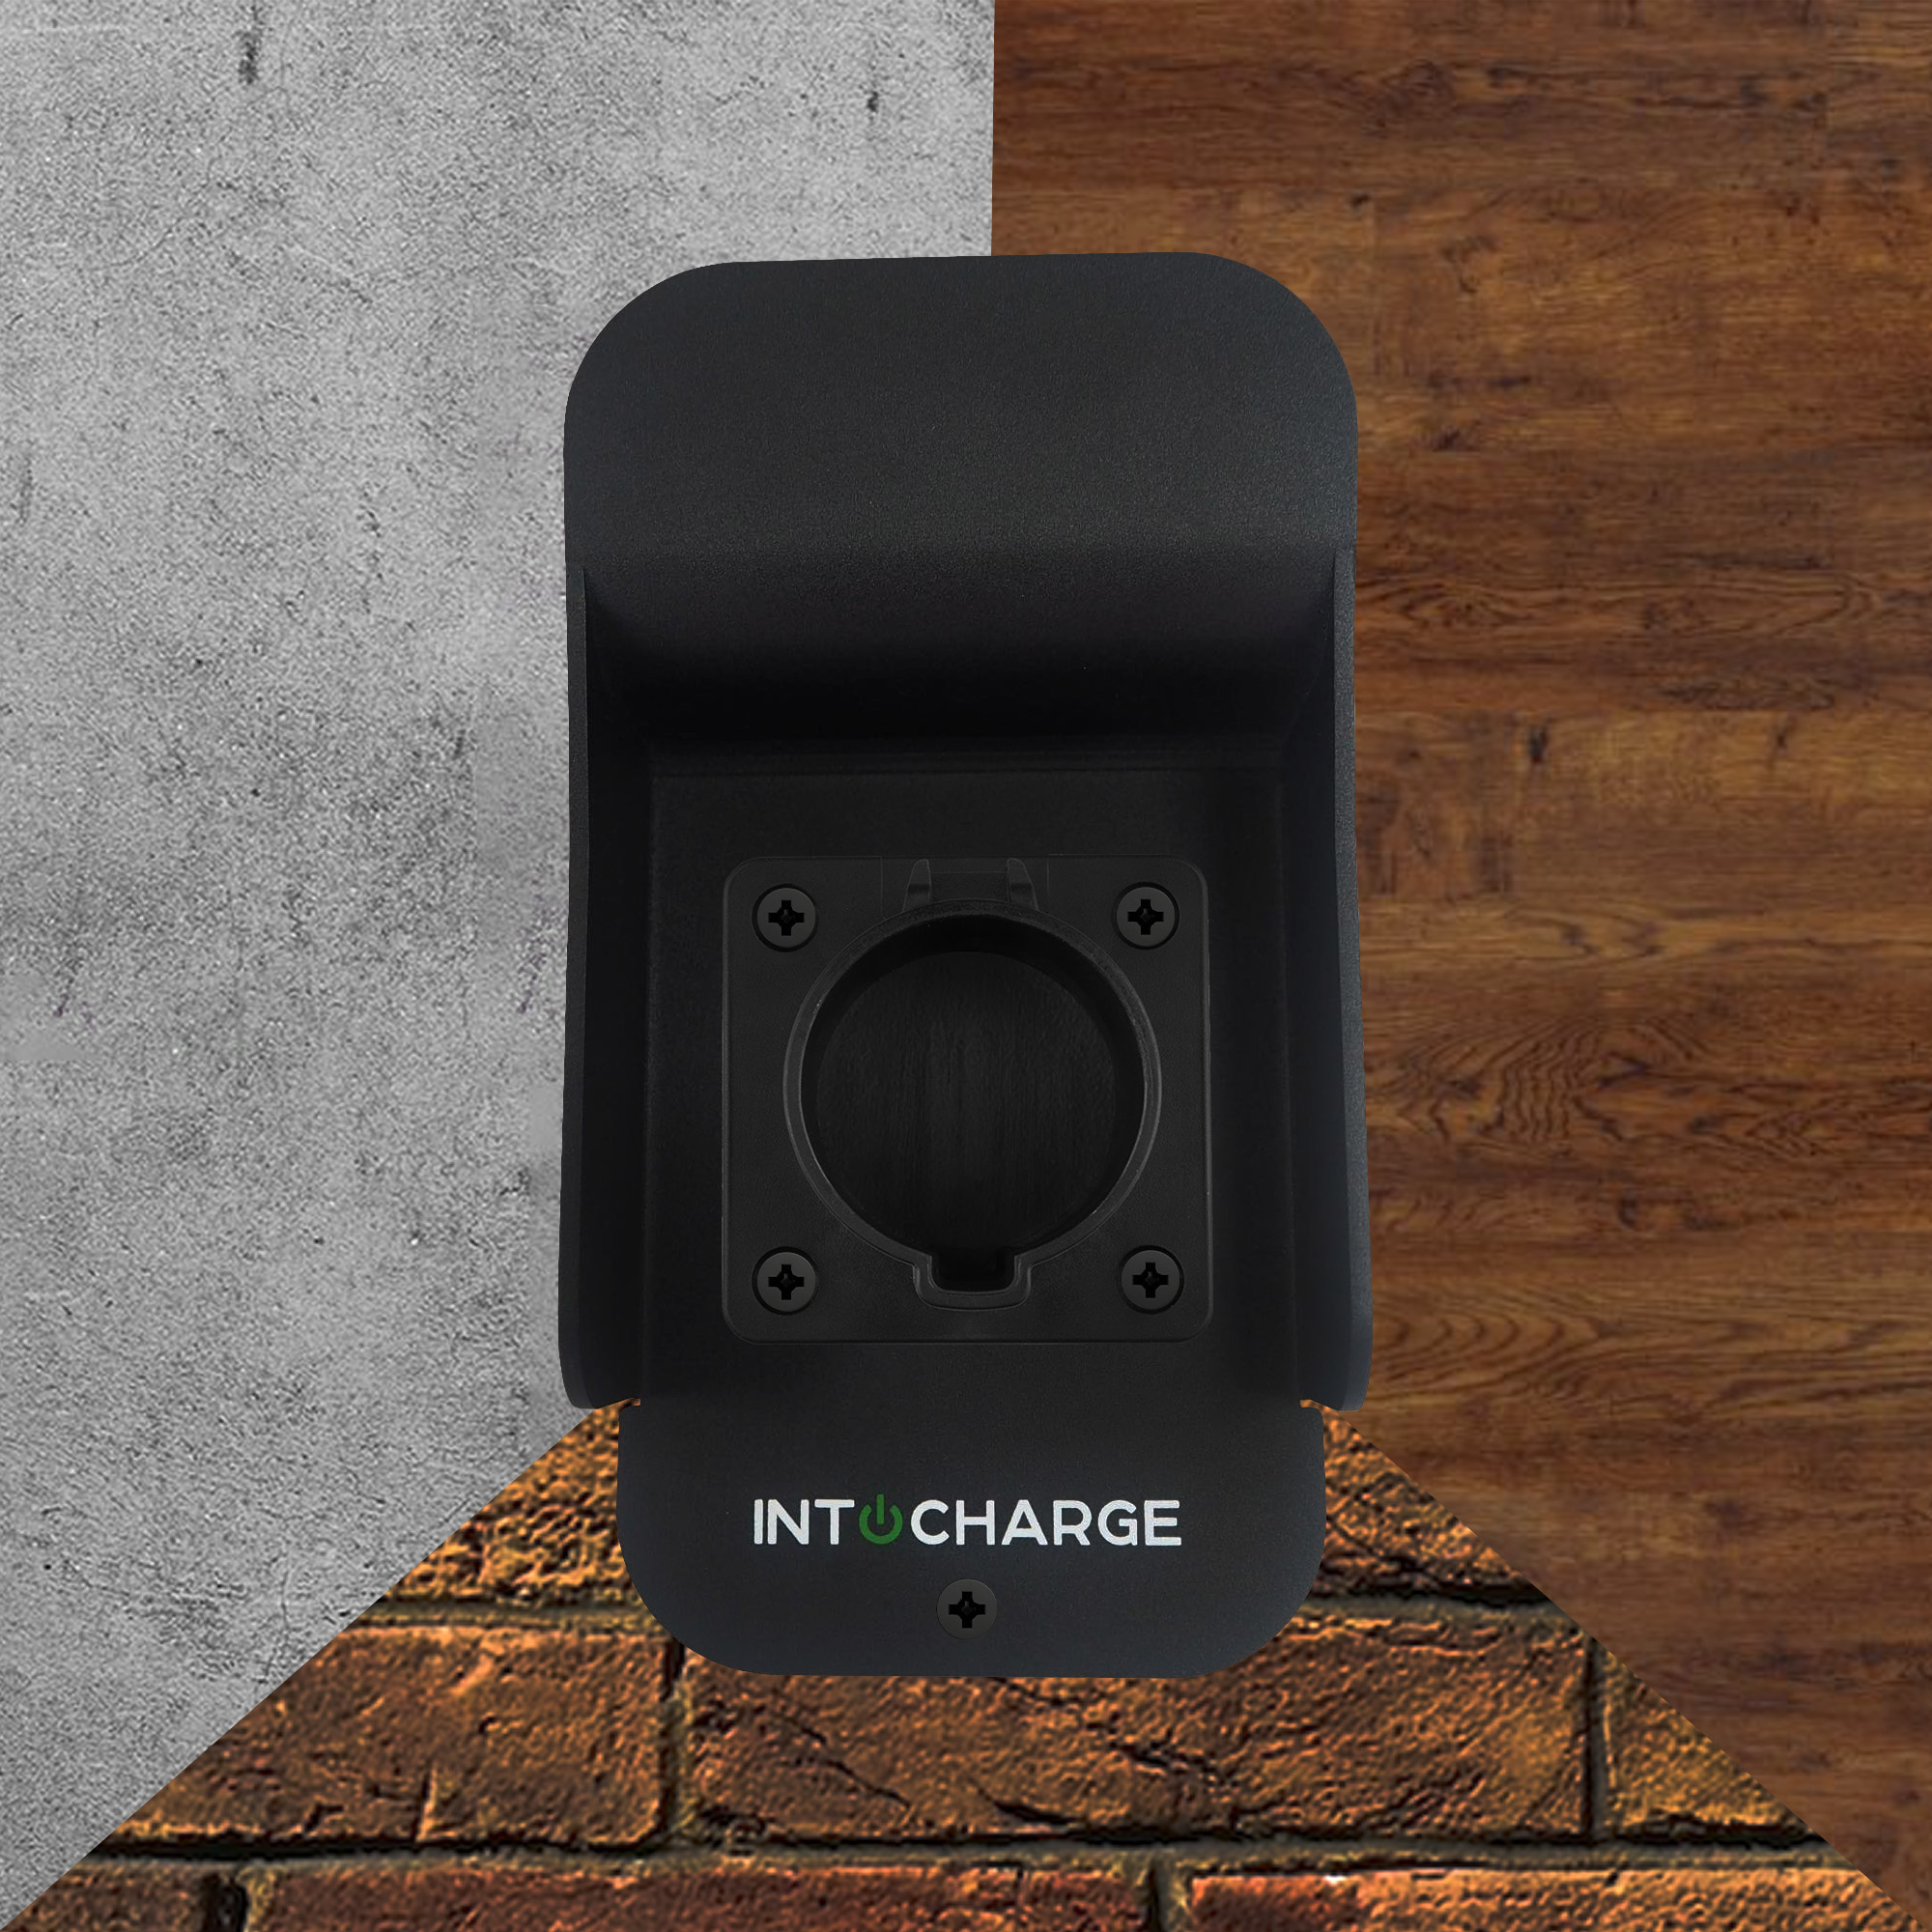 IntoCharge SAE J1772 Charger Holster Dock and Cable Holder